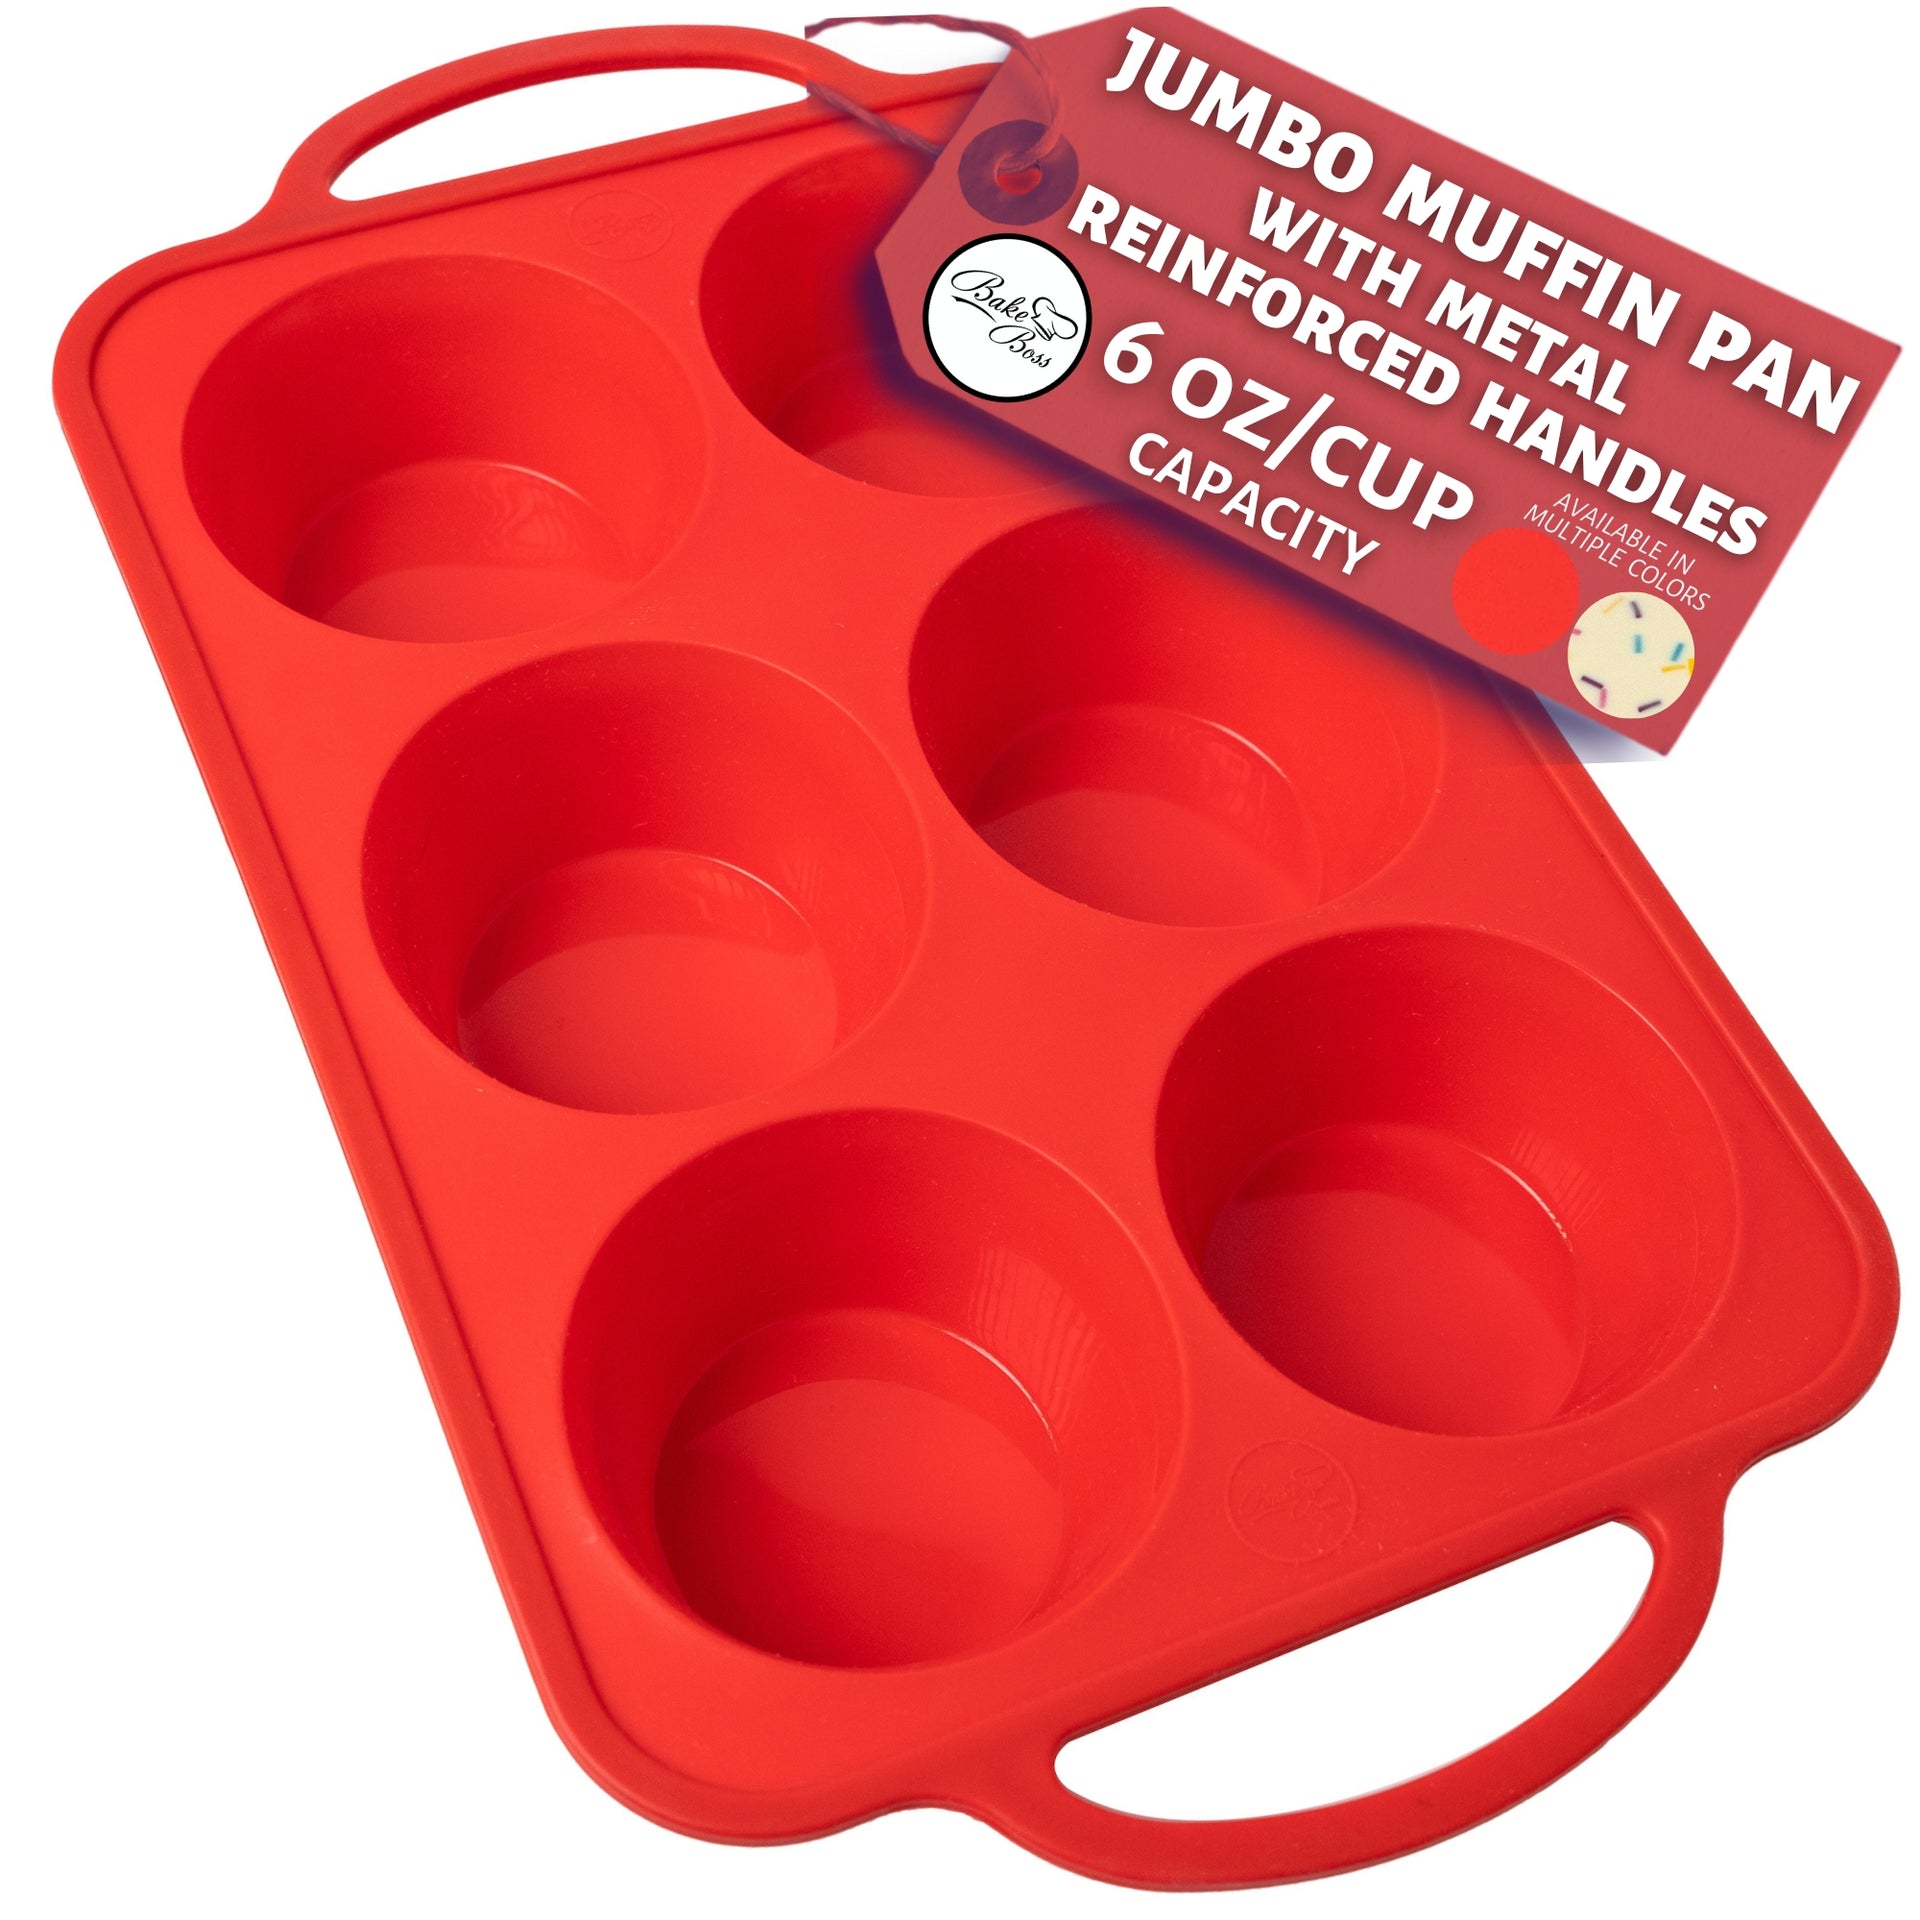 Treated myself to a Jumbo Texas Muffin Pan! Well worth the $32 they are  sooo big it can hold so much batter! : r/Baking